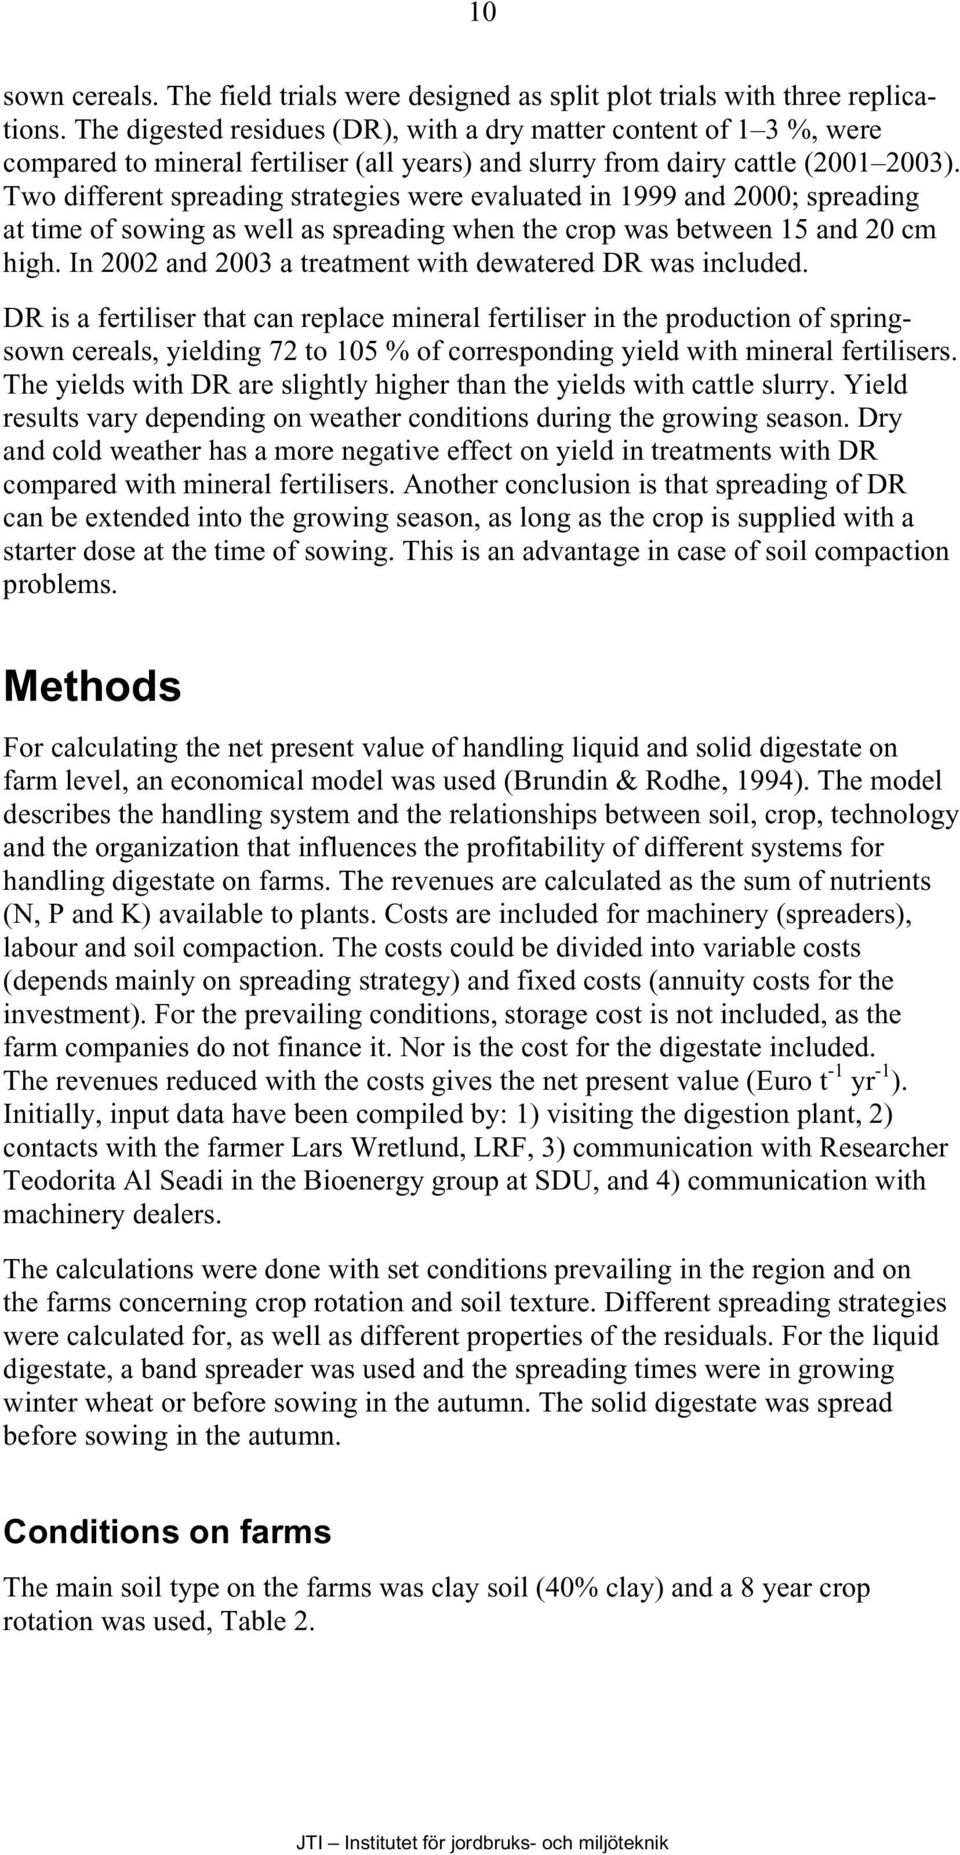 Two different spreading strategies were evaluated in 1999 and 2000; spreading at time of sowing as well as spreading when the crop was between 15 and 20 cm high.